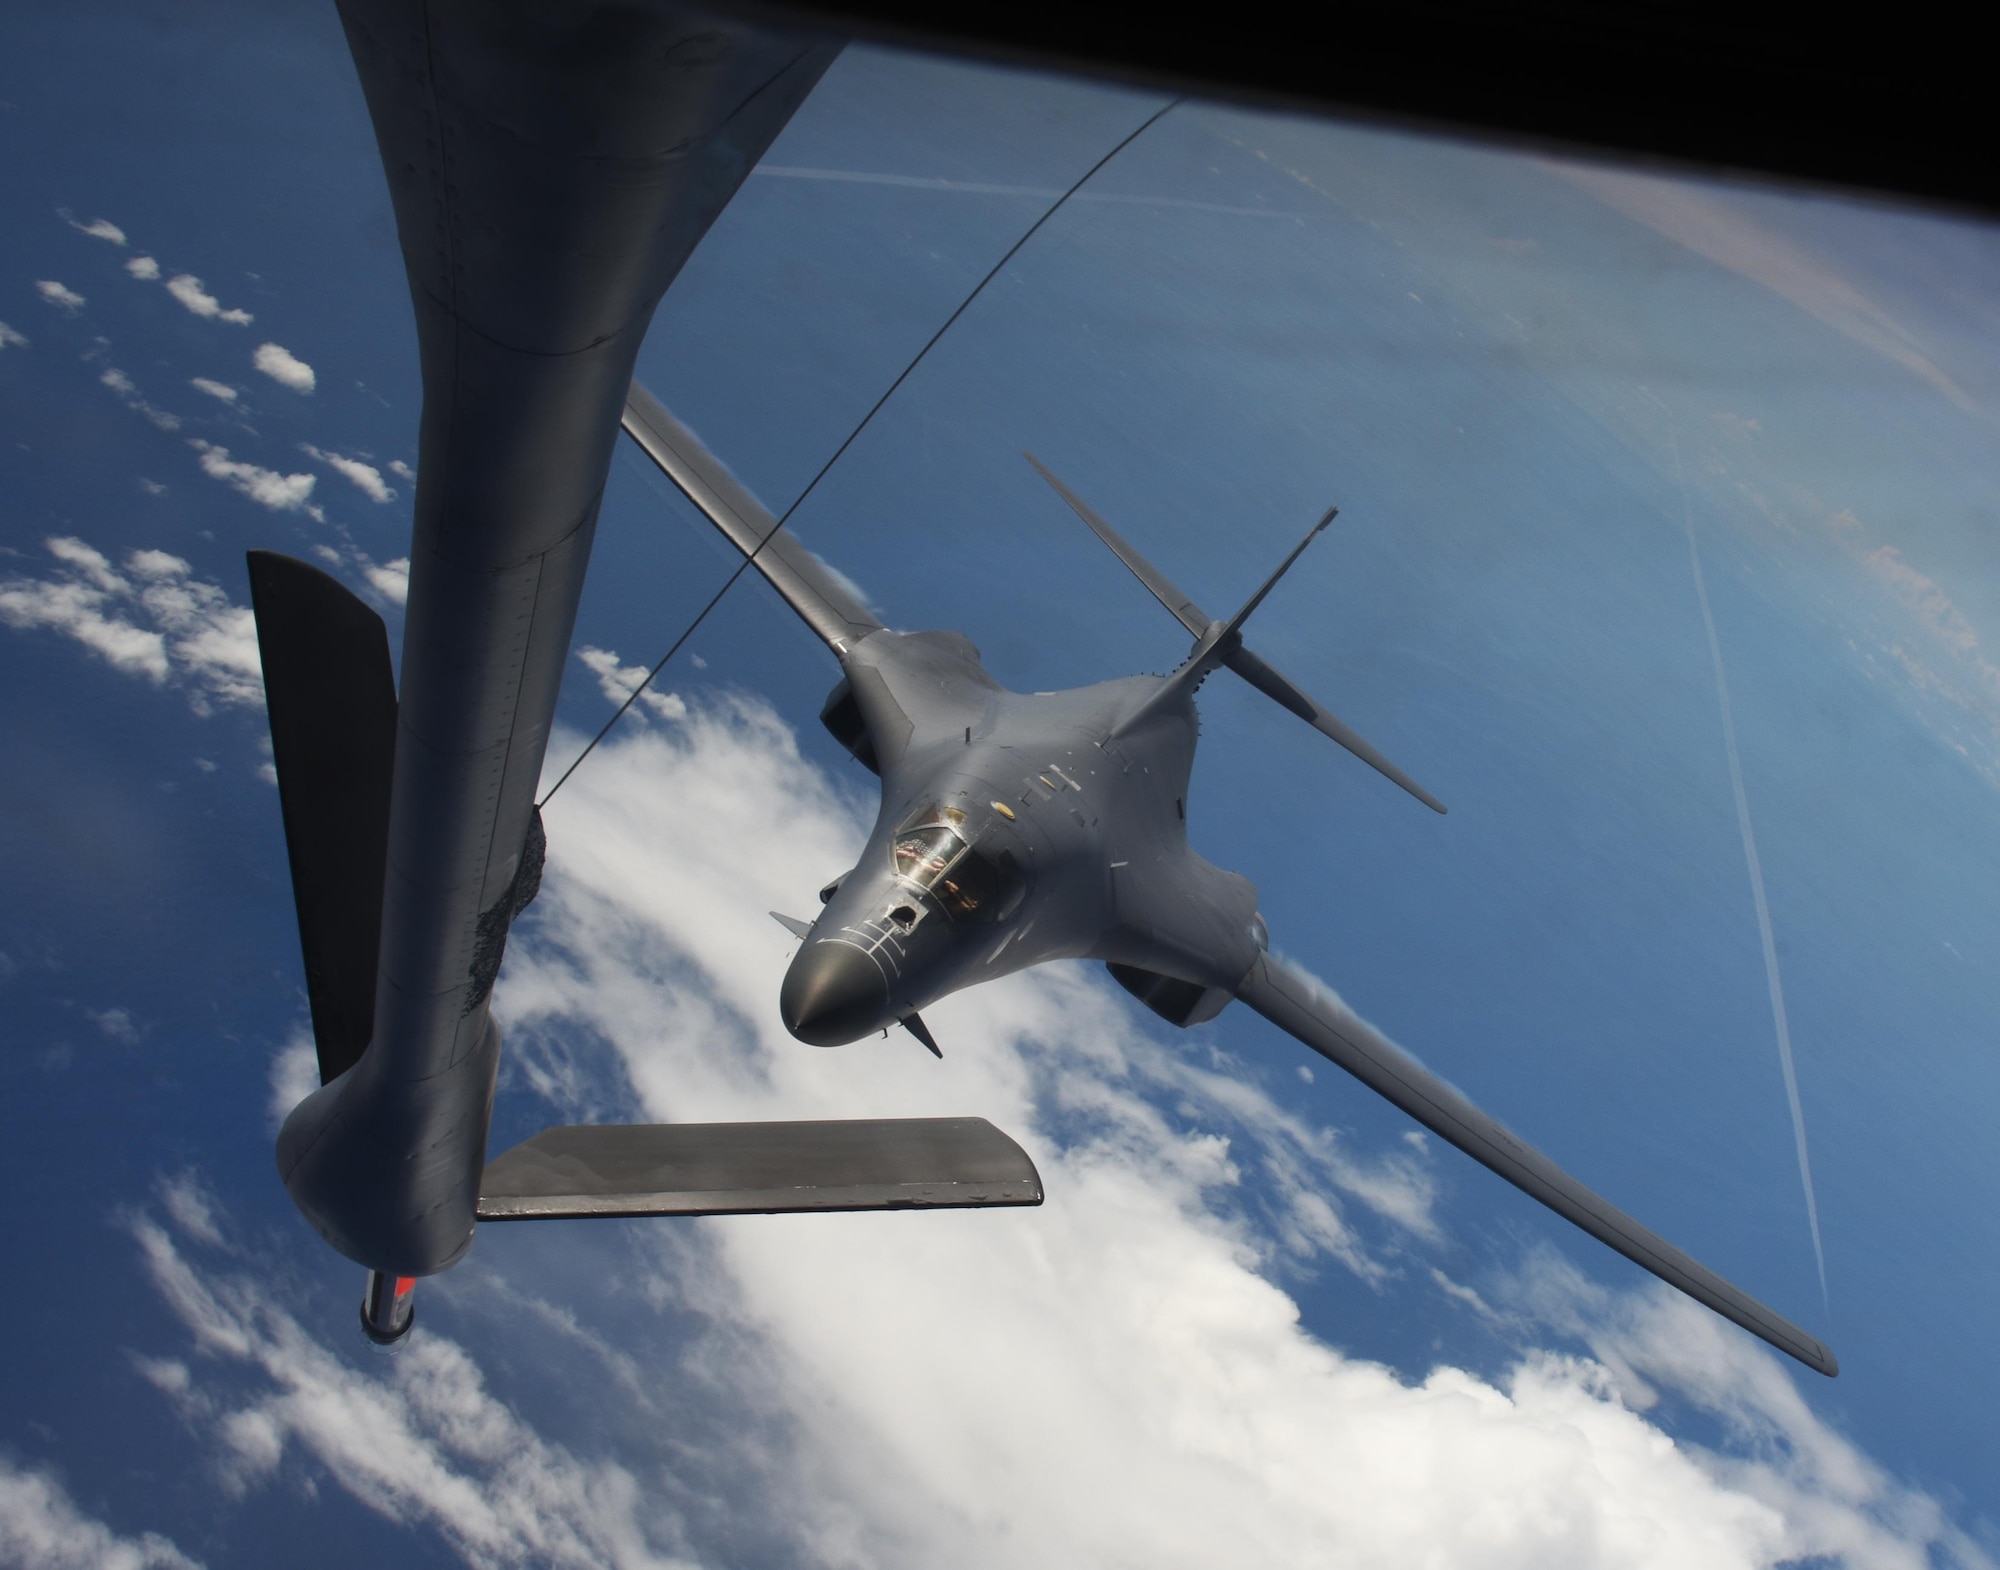 Two U.S. Air Force B-1B Lancers assigned to the 9th Expeditionary Bomb Squadron, deployed from Dyess Air Force Base, Texas, fly a 10-hour mission from Andersen Air Force Base, Guam, through the South China Sea, operating with the U.S. Navy's Arleigh Burke-class guided-missile destroyer USS Sterett (DDG 104), June 8, 2017. The joint training, organized under Pacific Command's continuous bomber presence program (CBP), allows the Air Force and Navy to increase interoperability by refining joint tactics, techniques and procedures while simultaneously strengthening their ability to seamlessly integrate their operations. (U.S. Air Force photo/Tech. Sgt. Richard P. Ebensberger)